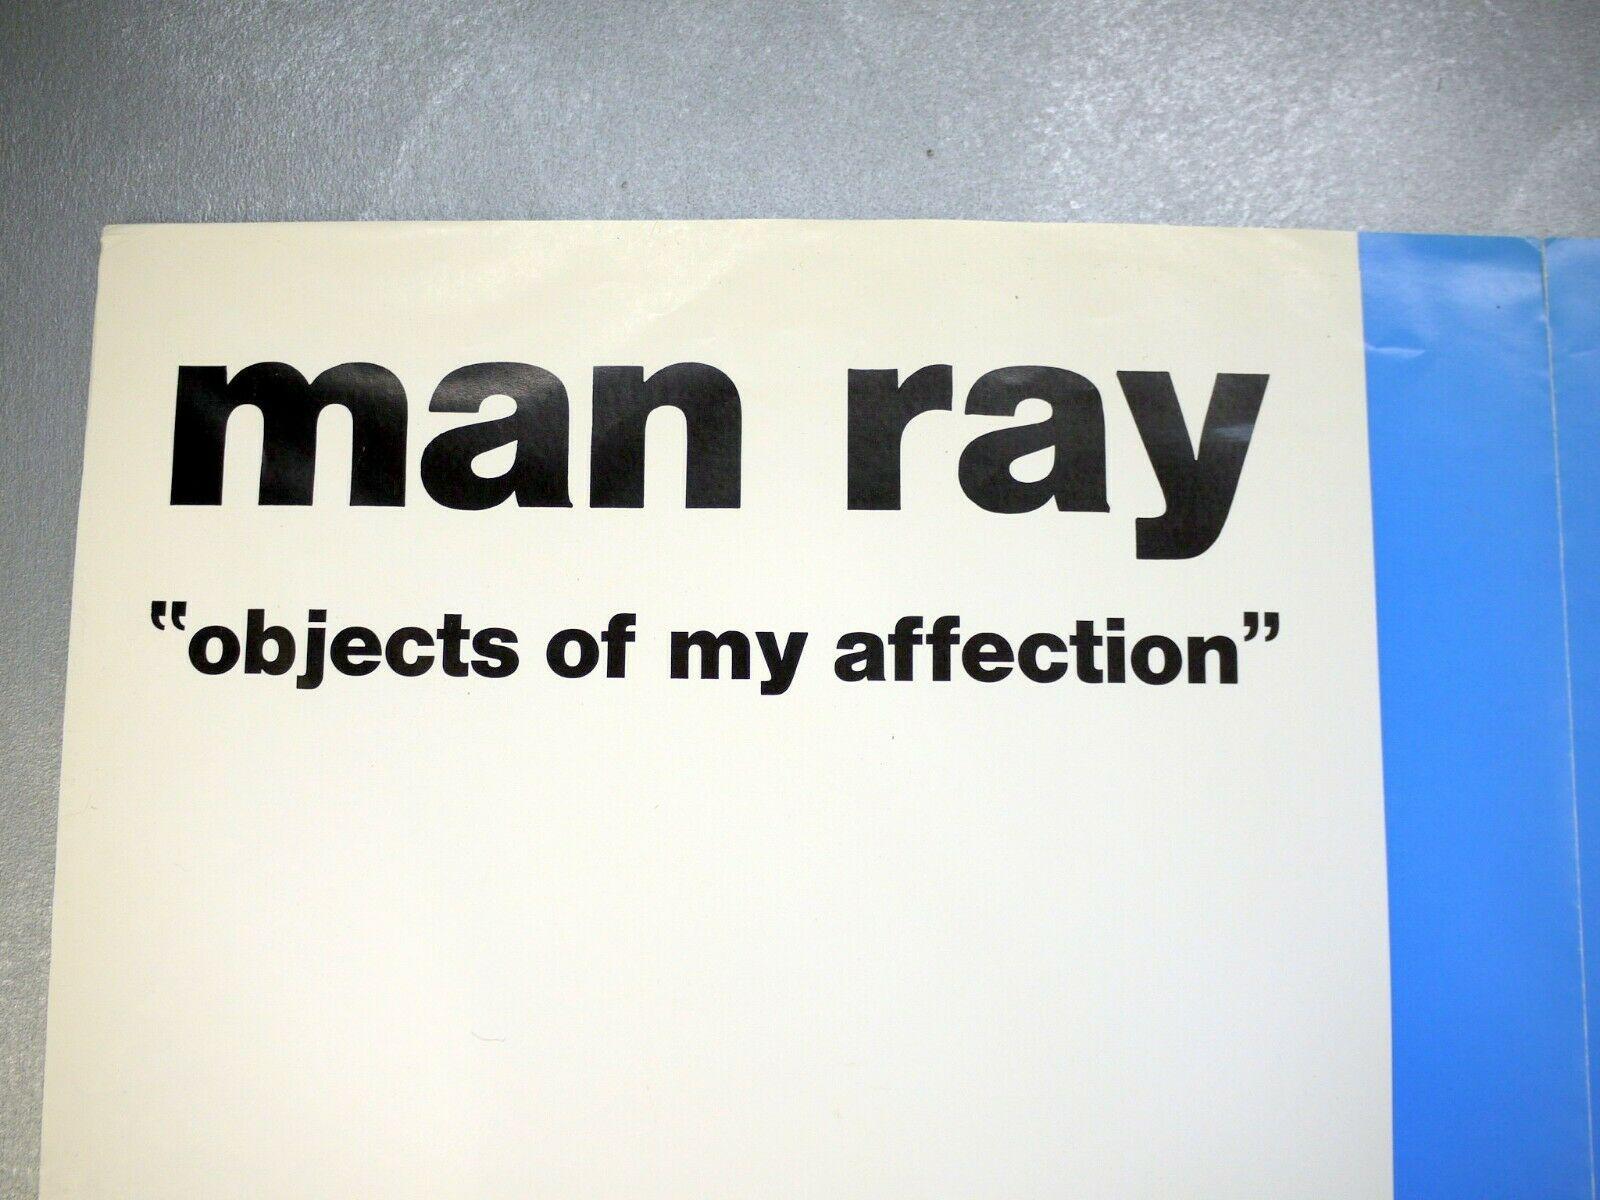 The “objects” of American artist Man Ray’s affection were small, limited-edition sculptures. Although influenced by French artist Marcel Duchamp, Ray eschewed the Duchampian term readymade, preferring a lyrical title based on a popular song, “The